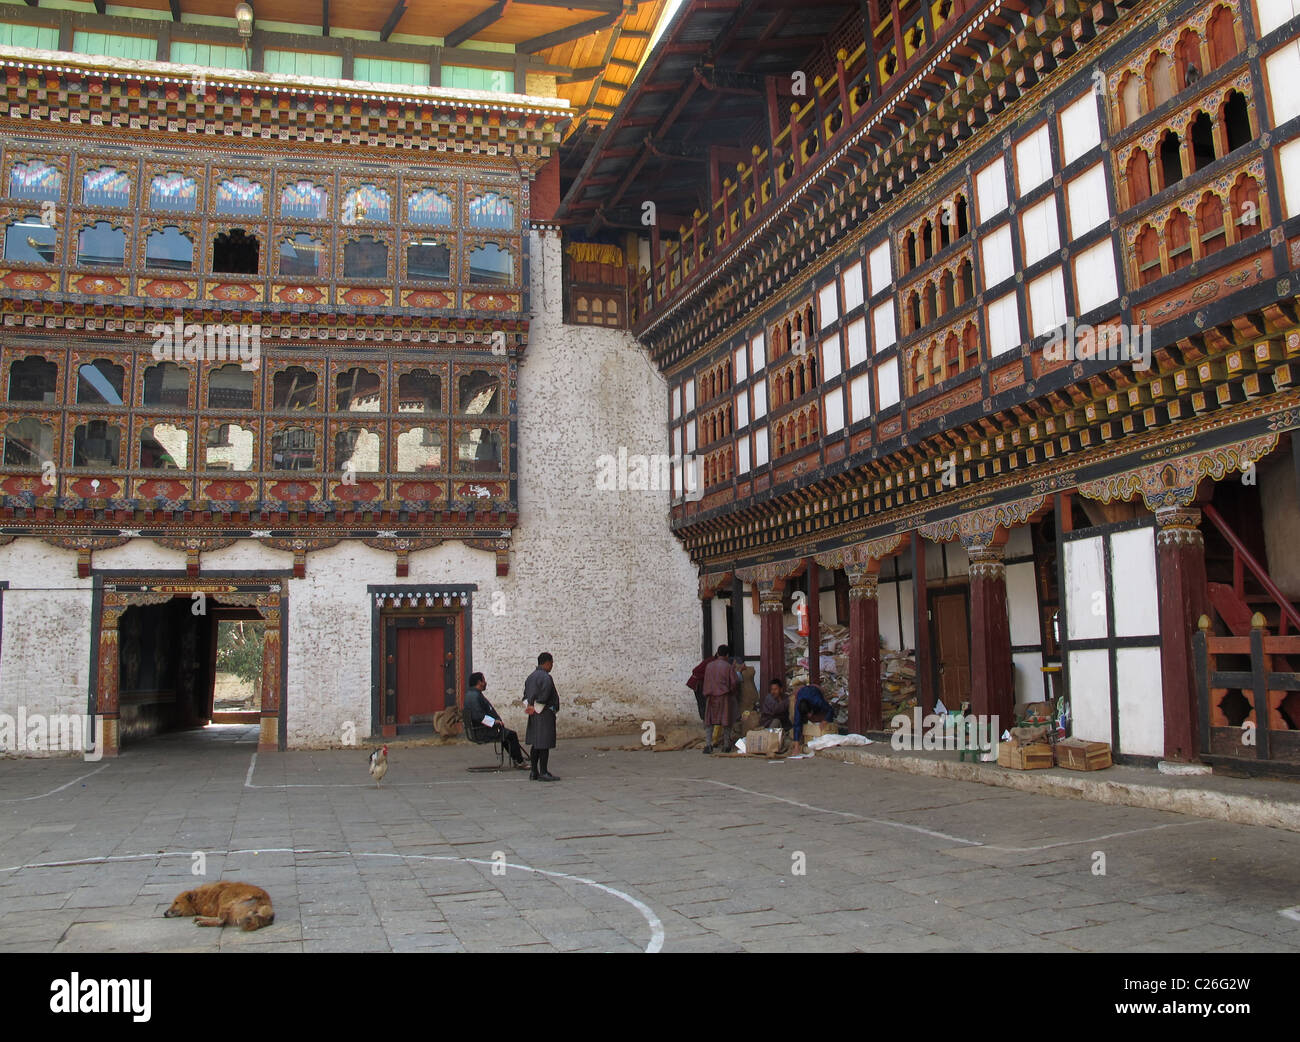 Destruction of old documents at the Dzong at Trashigang, East Bhutan Stock Photo